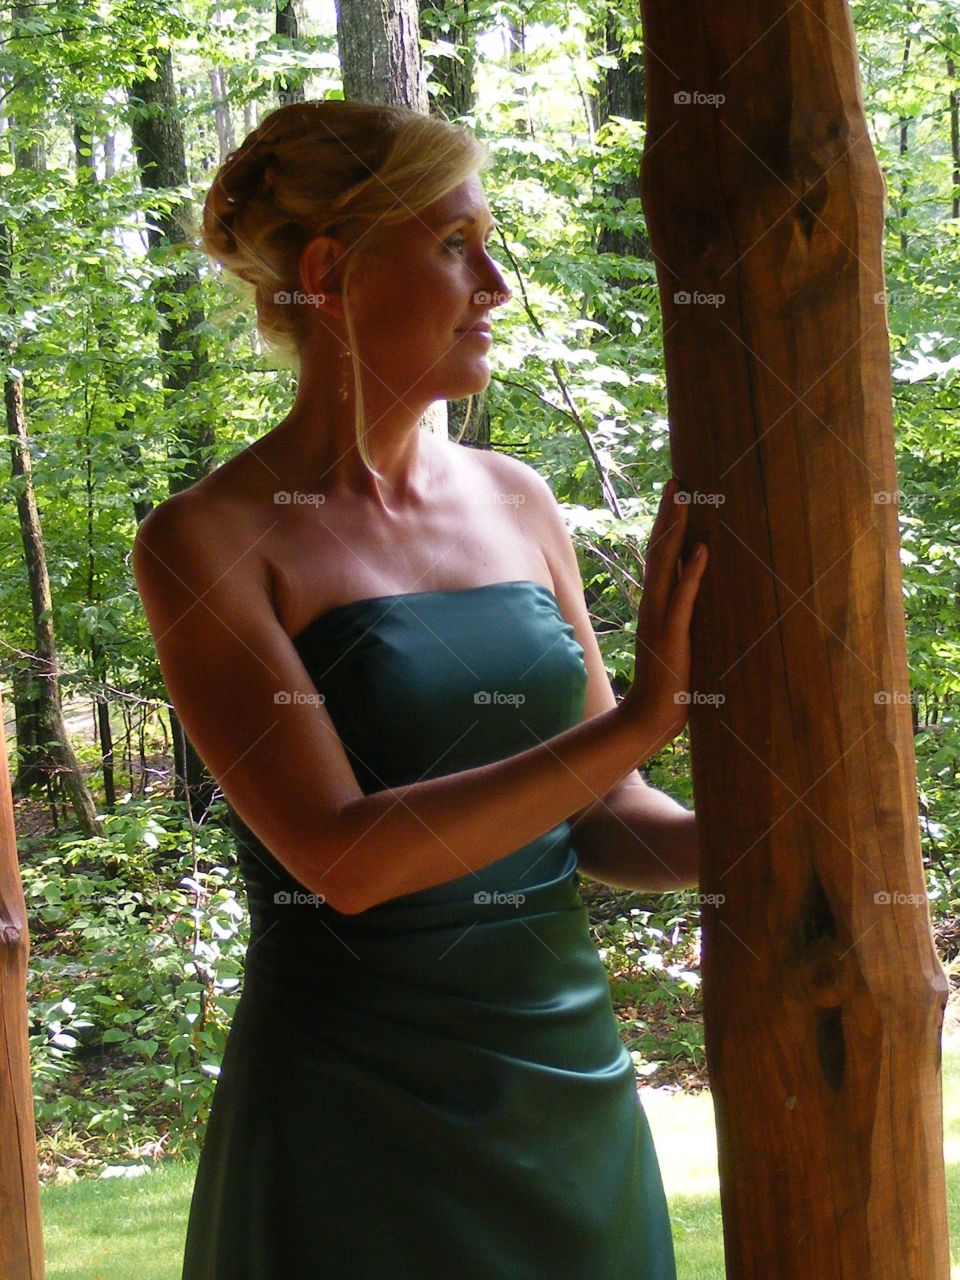 Blond woman in formal gown standing outside a log cabin in the woods